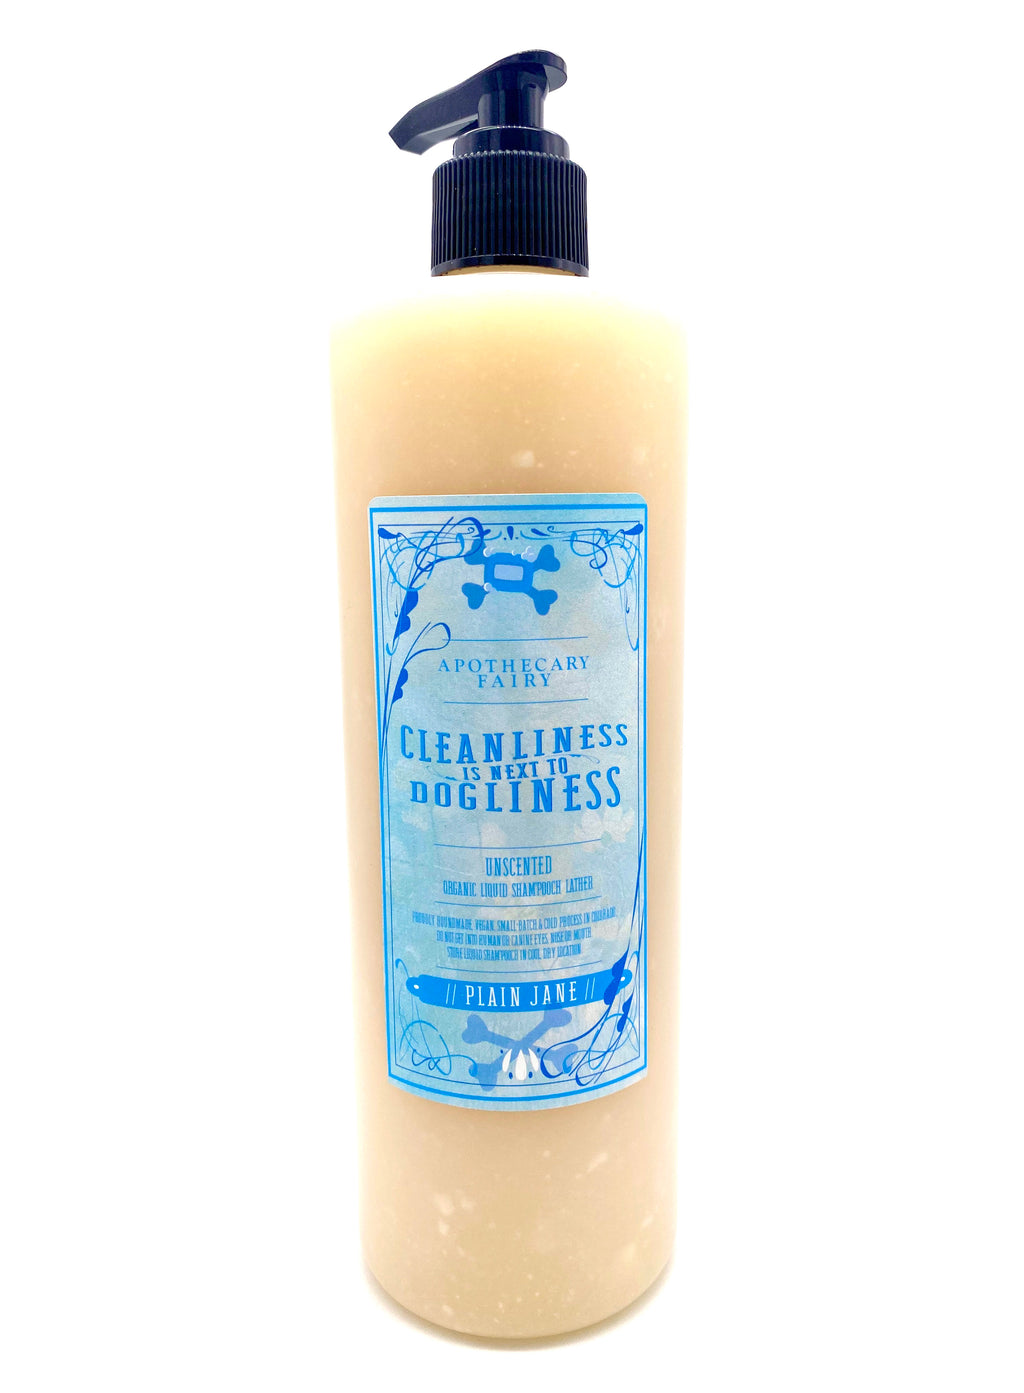 Cleanliness Is Next To Dogliness- Plain Jane Liquid Sham'pooch 16oz - The Apothecary Fairy